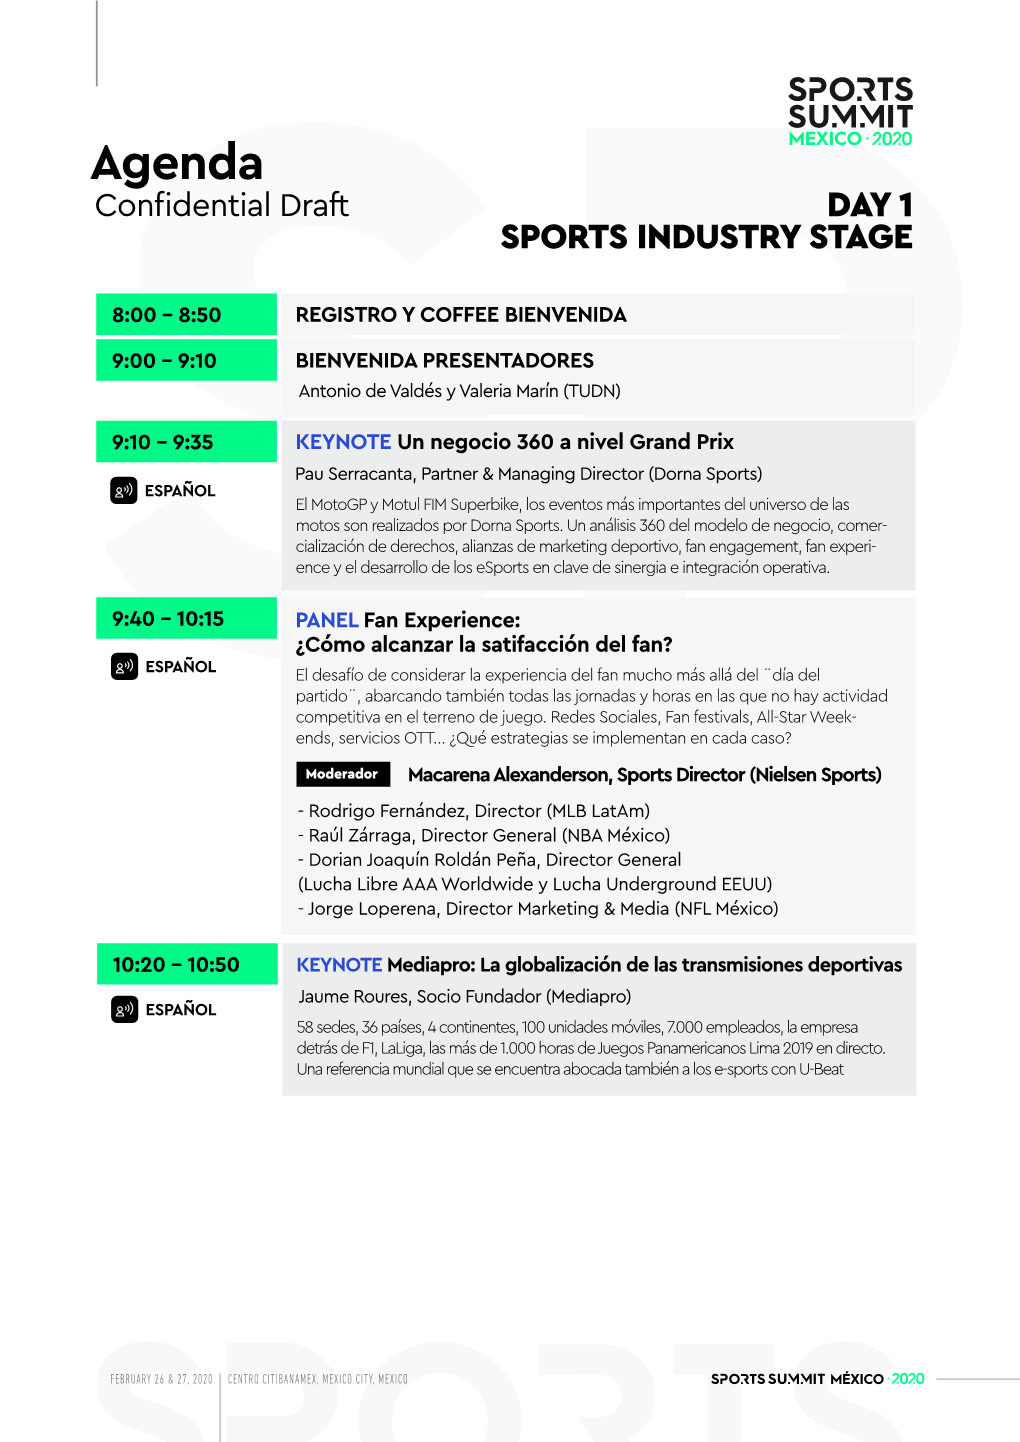 Agenda Conﬁdential Draft DAY 1 SPORTS INDUSTRY STAGE